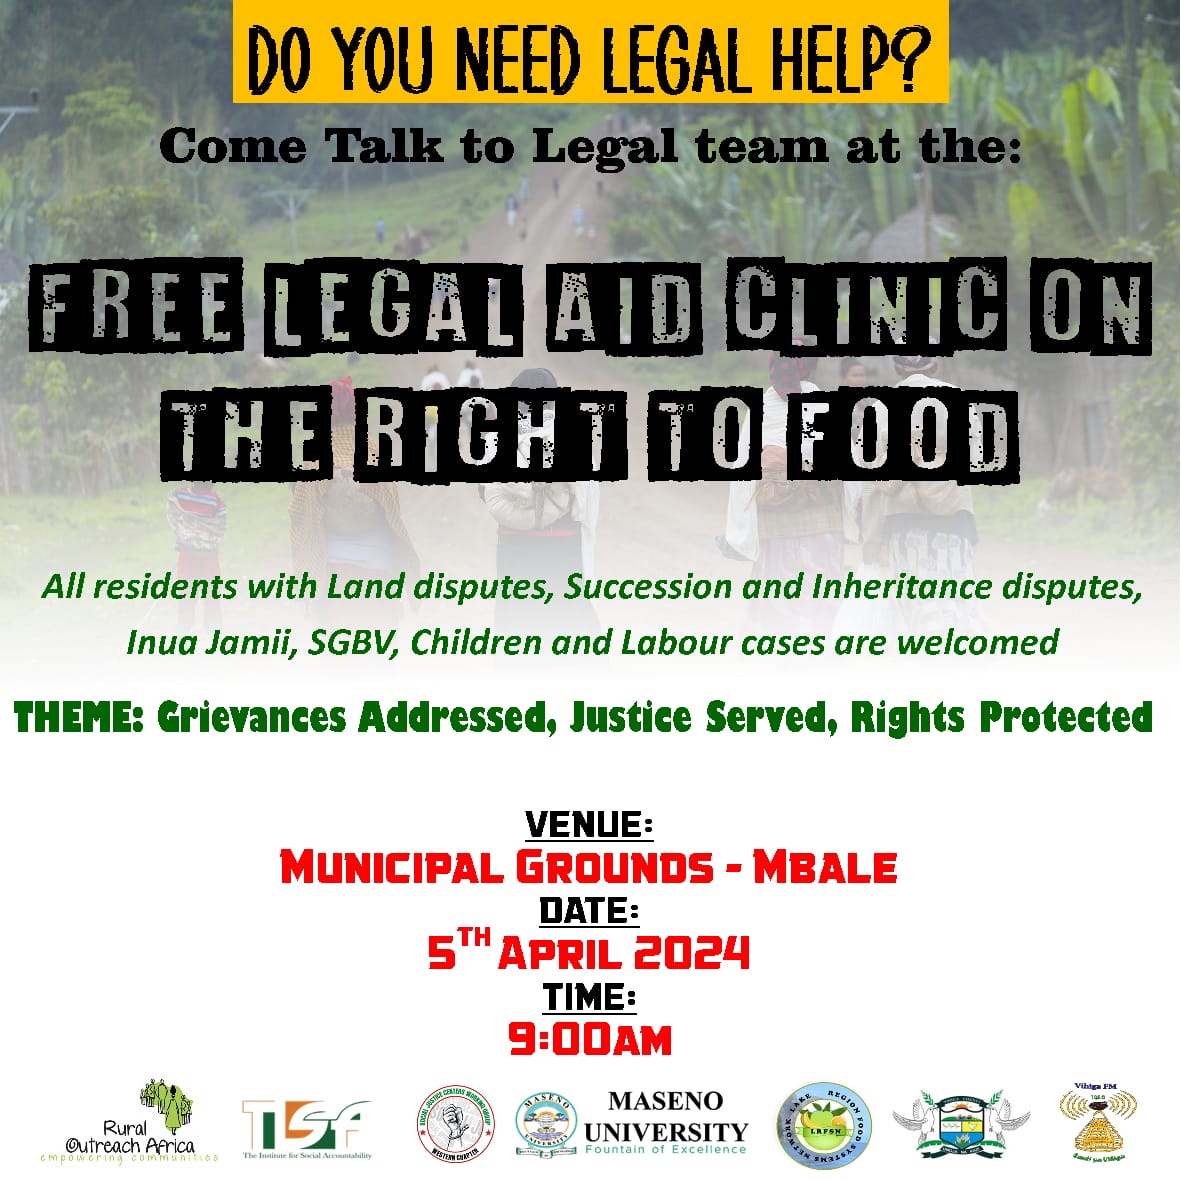 📢 Just 2 days left, an incredible FREE Legal Aid Clinic bringing justice closer to those in need! Afterwards, an insightful discussion on the right to food violations in Kenya! 🍲 Don't miss out Municipal Grounds in Mbale,Vihiga on April 5th, 2024, from 9:00 am to 3:00 pm!